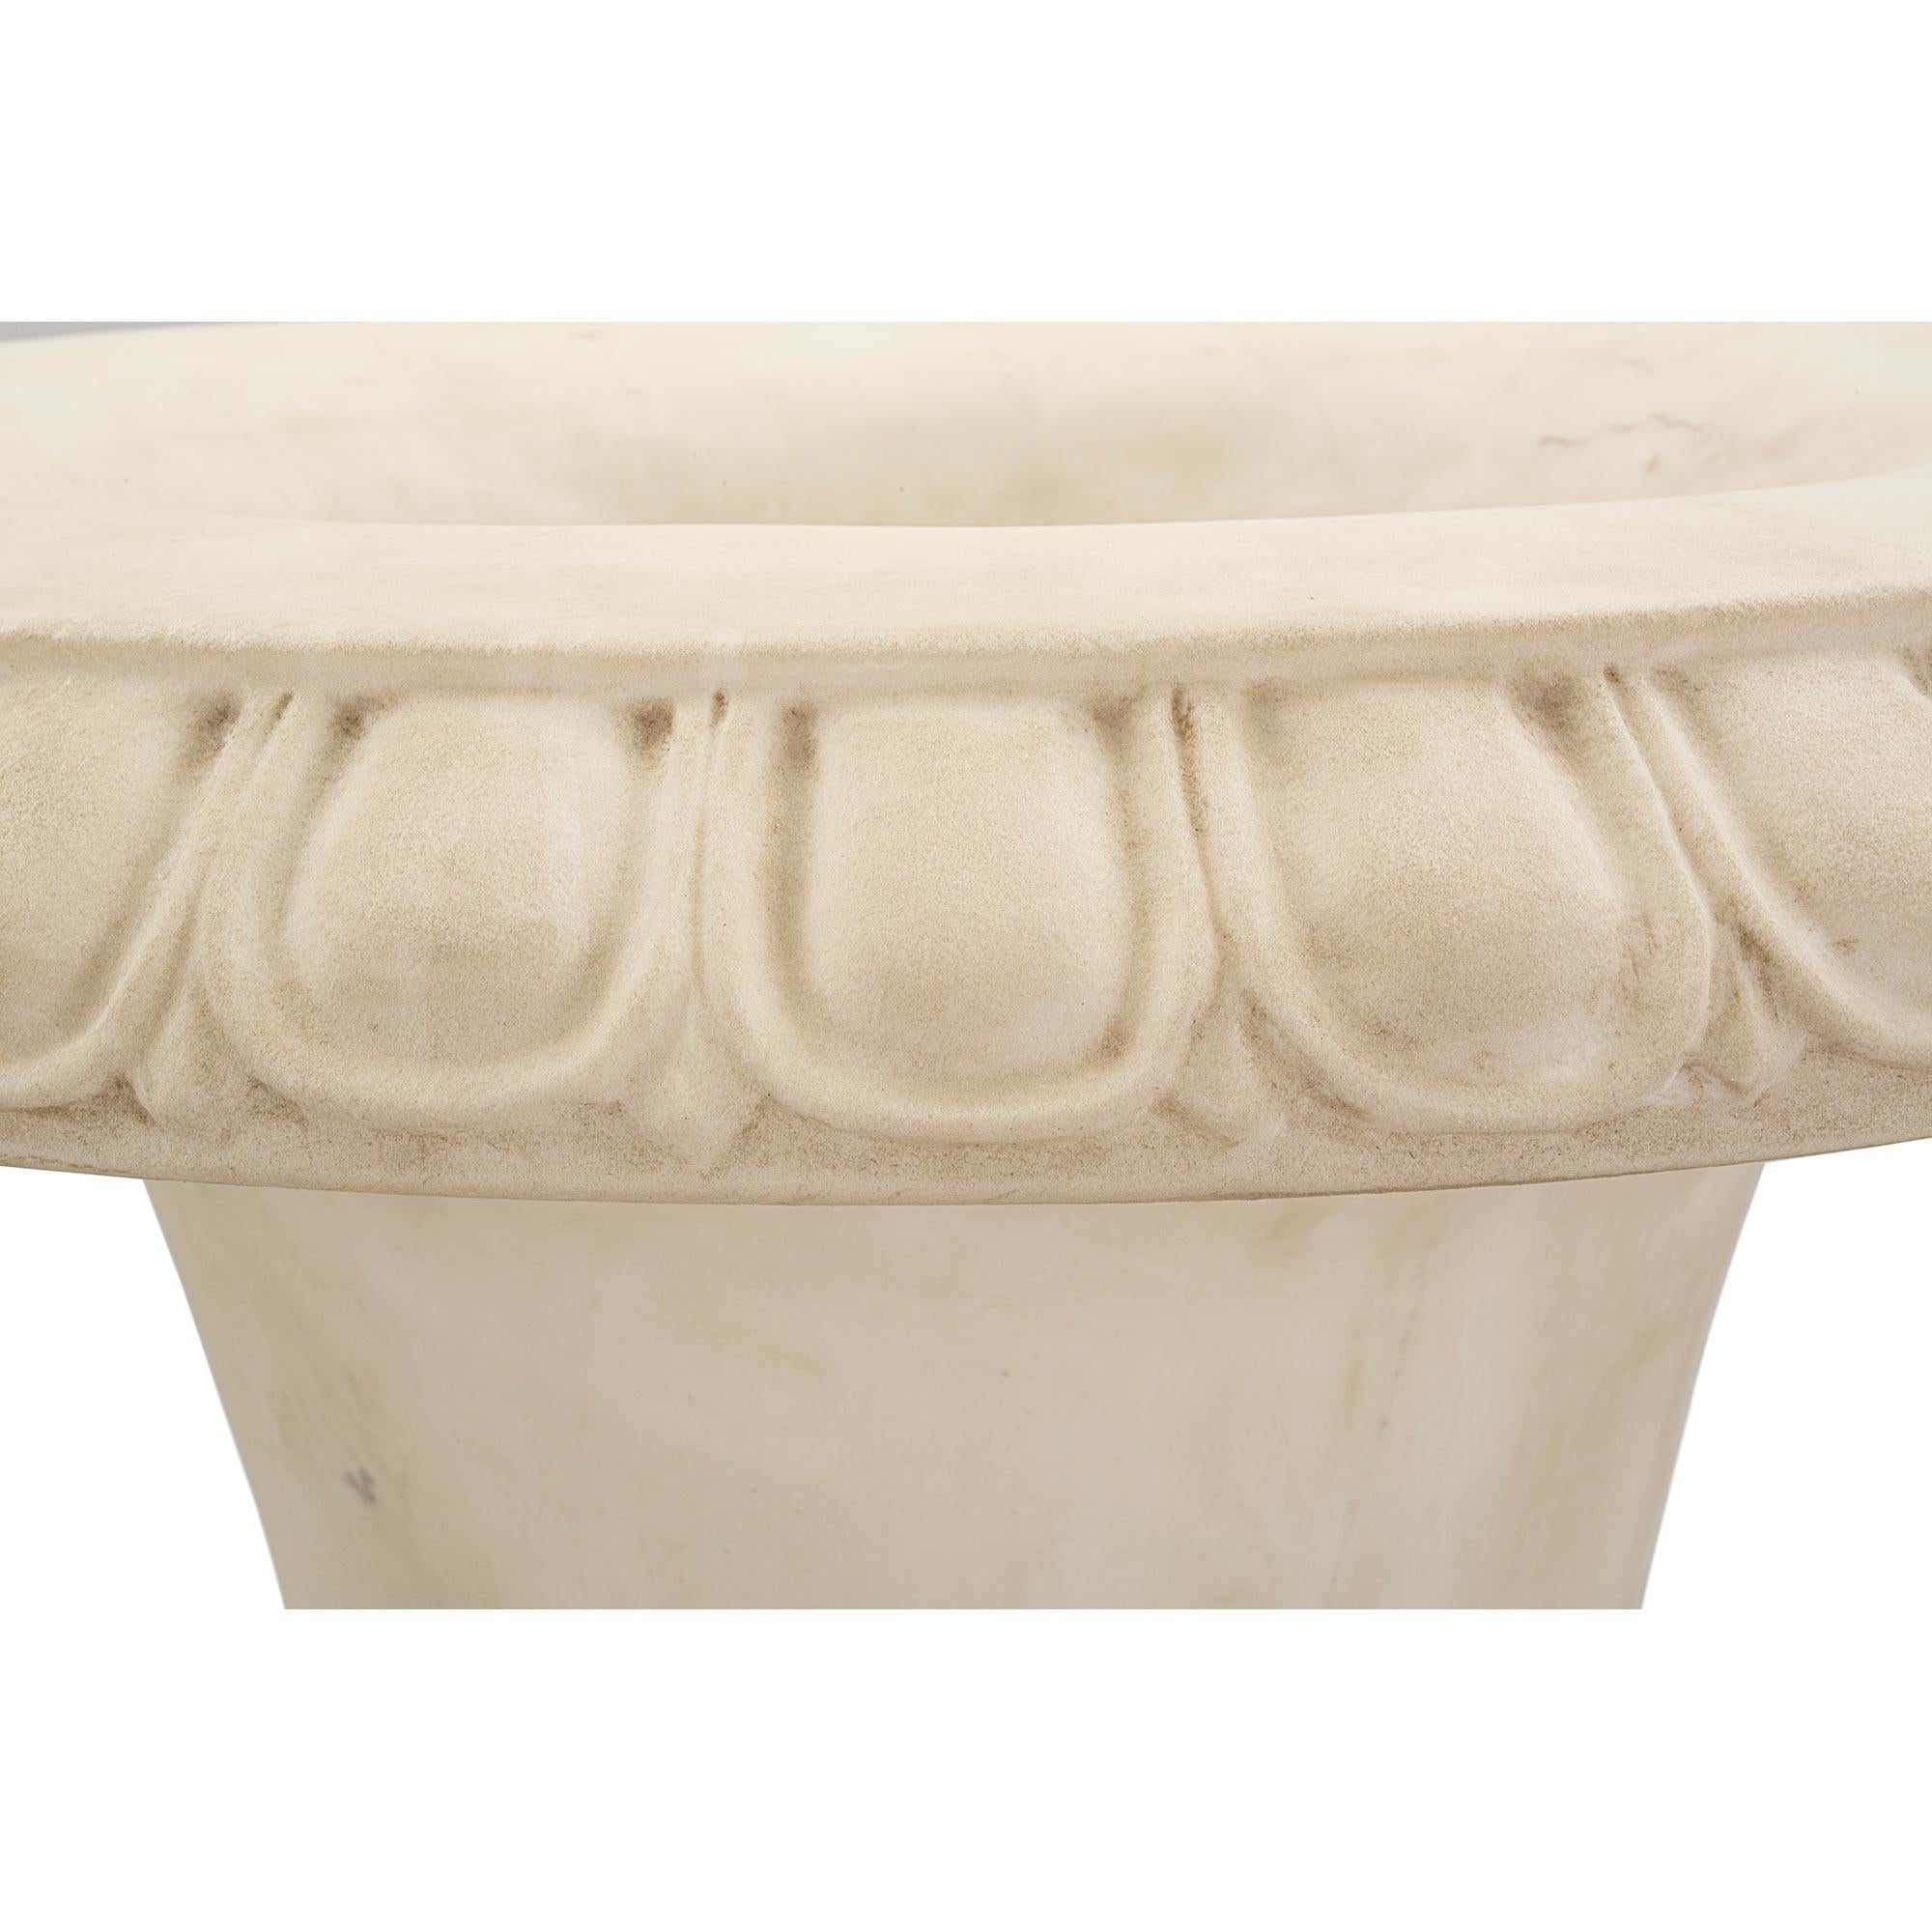 Pair of Italian 19th Century Large Scale White Carrara Marble Urns For Sale 1